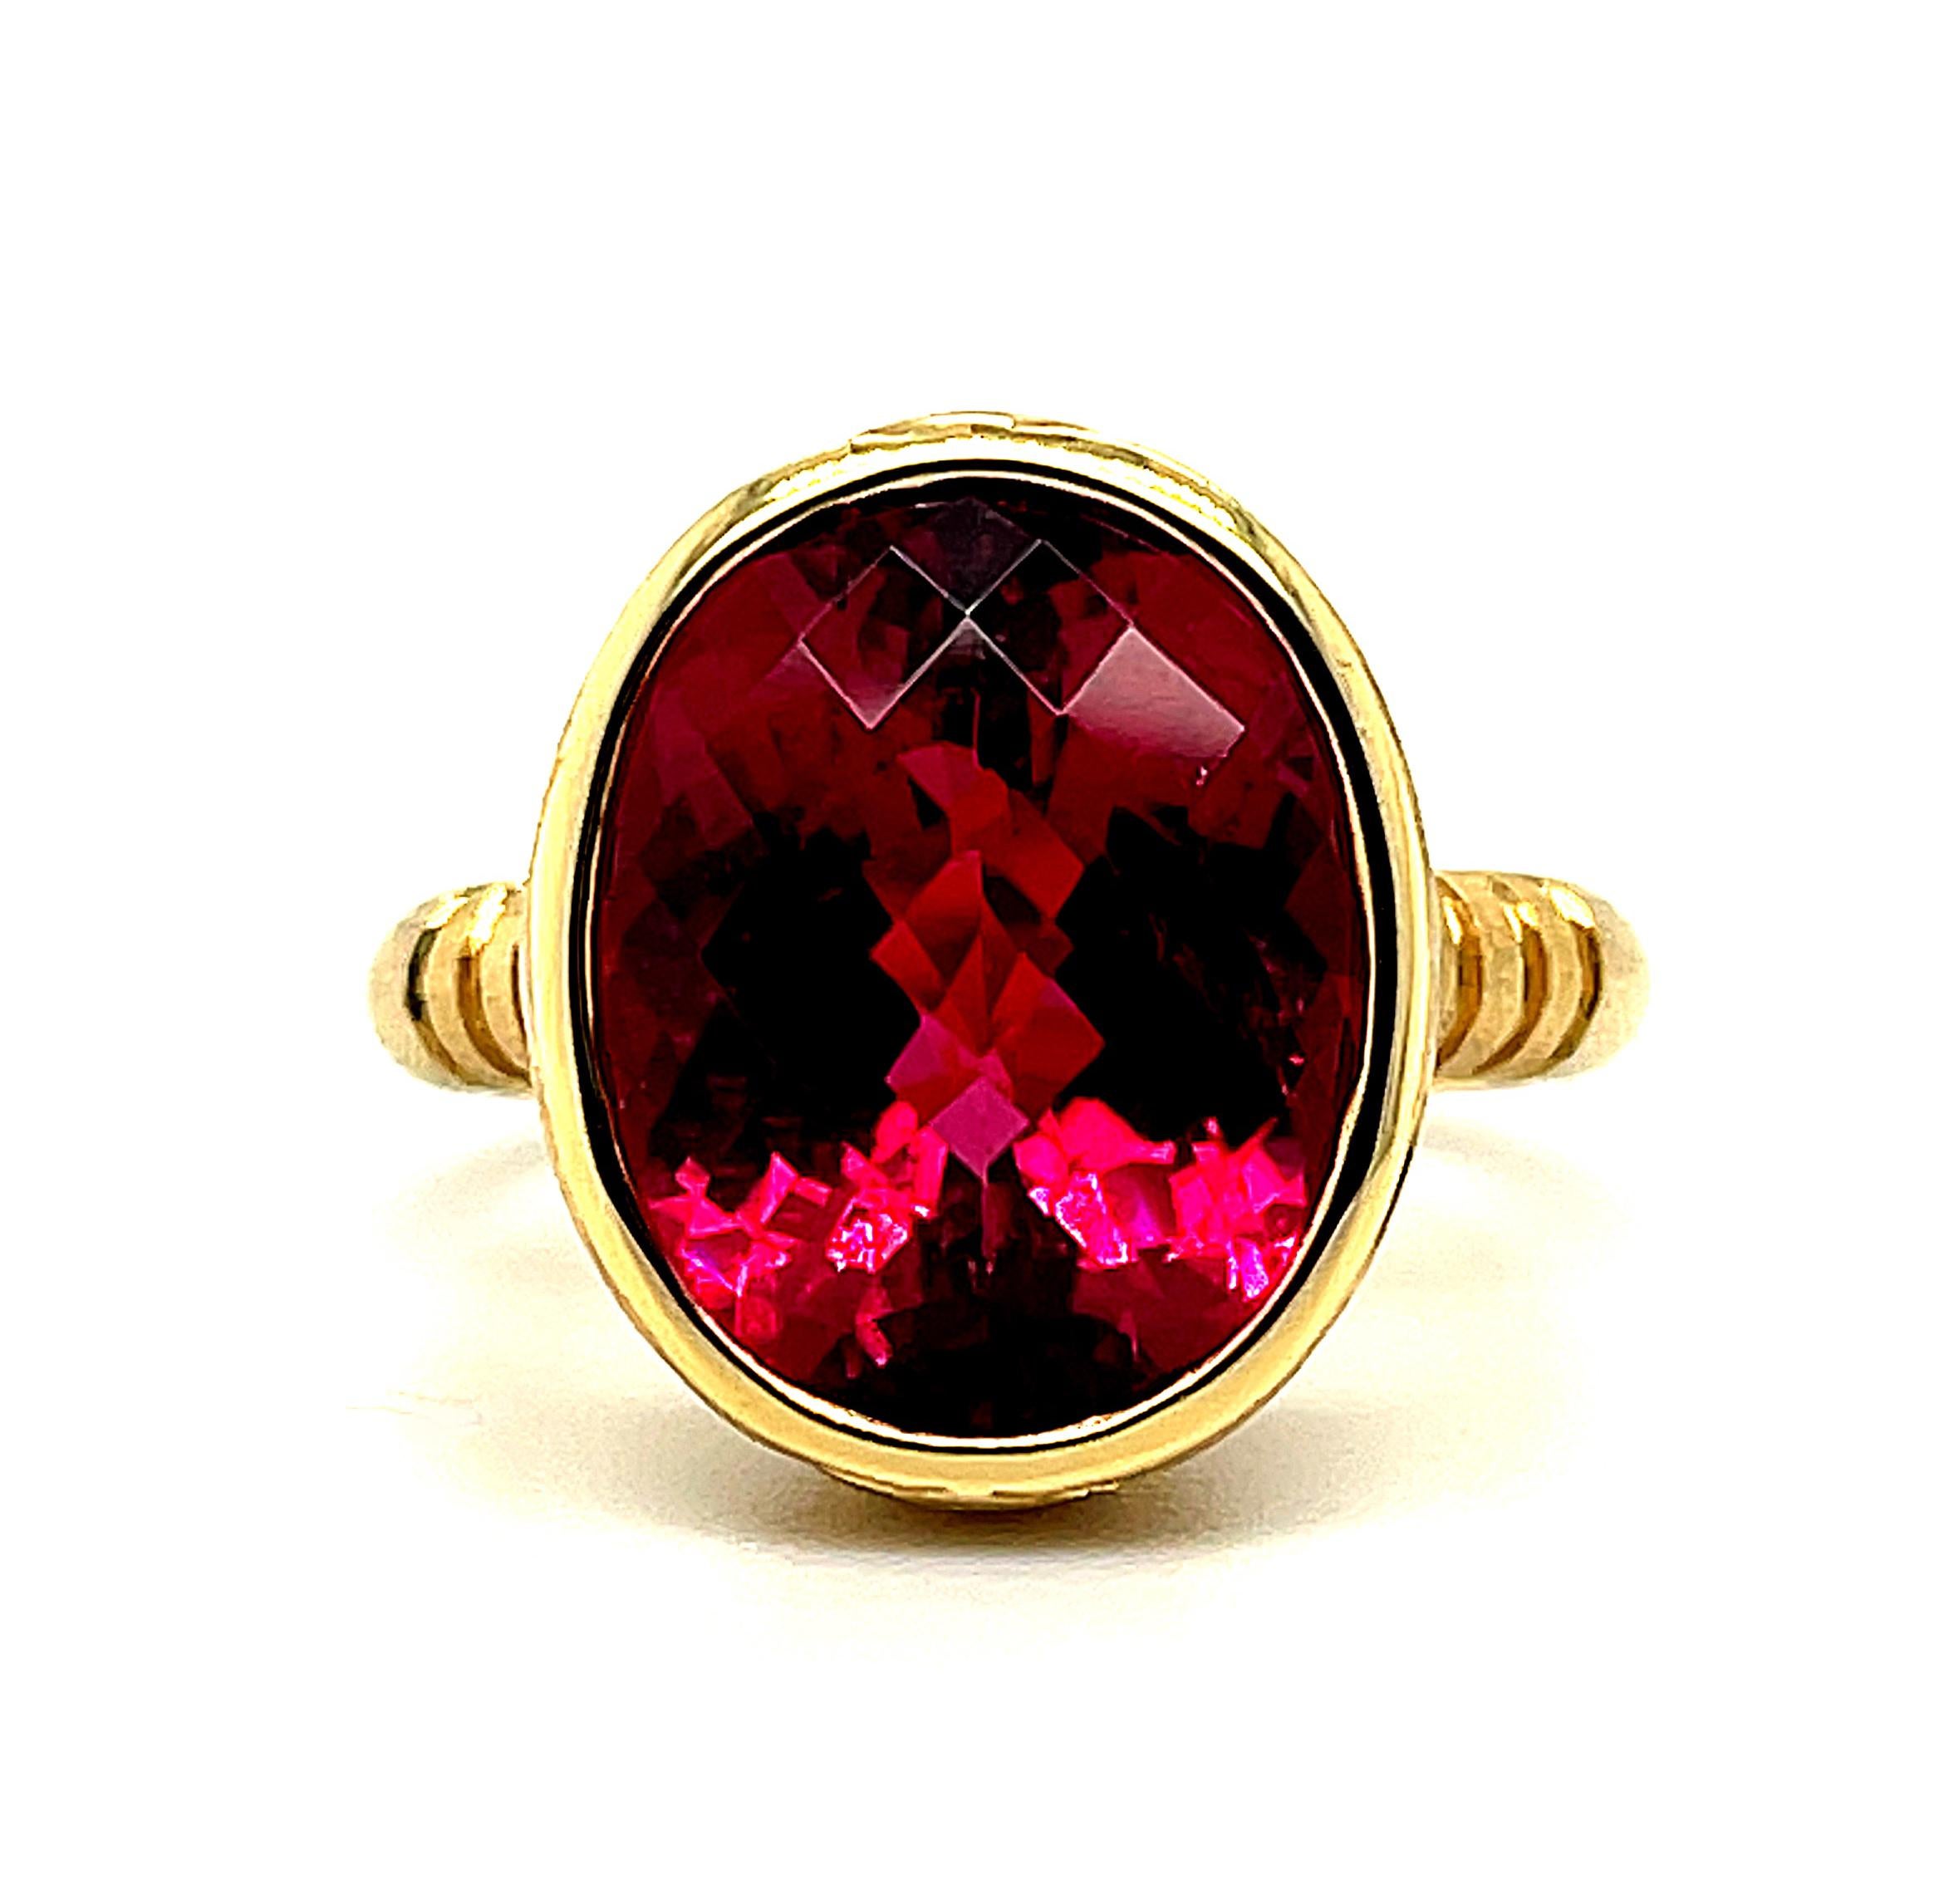 This handsome ring features a large rubellite tourmaline of exceptional quality; perfect for daytime or evening wear! The rubellite weighs 9.54 carats and has superior rich color and clarity. It is oval in shape, with an unusual 